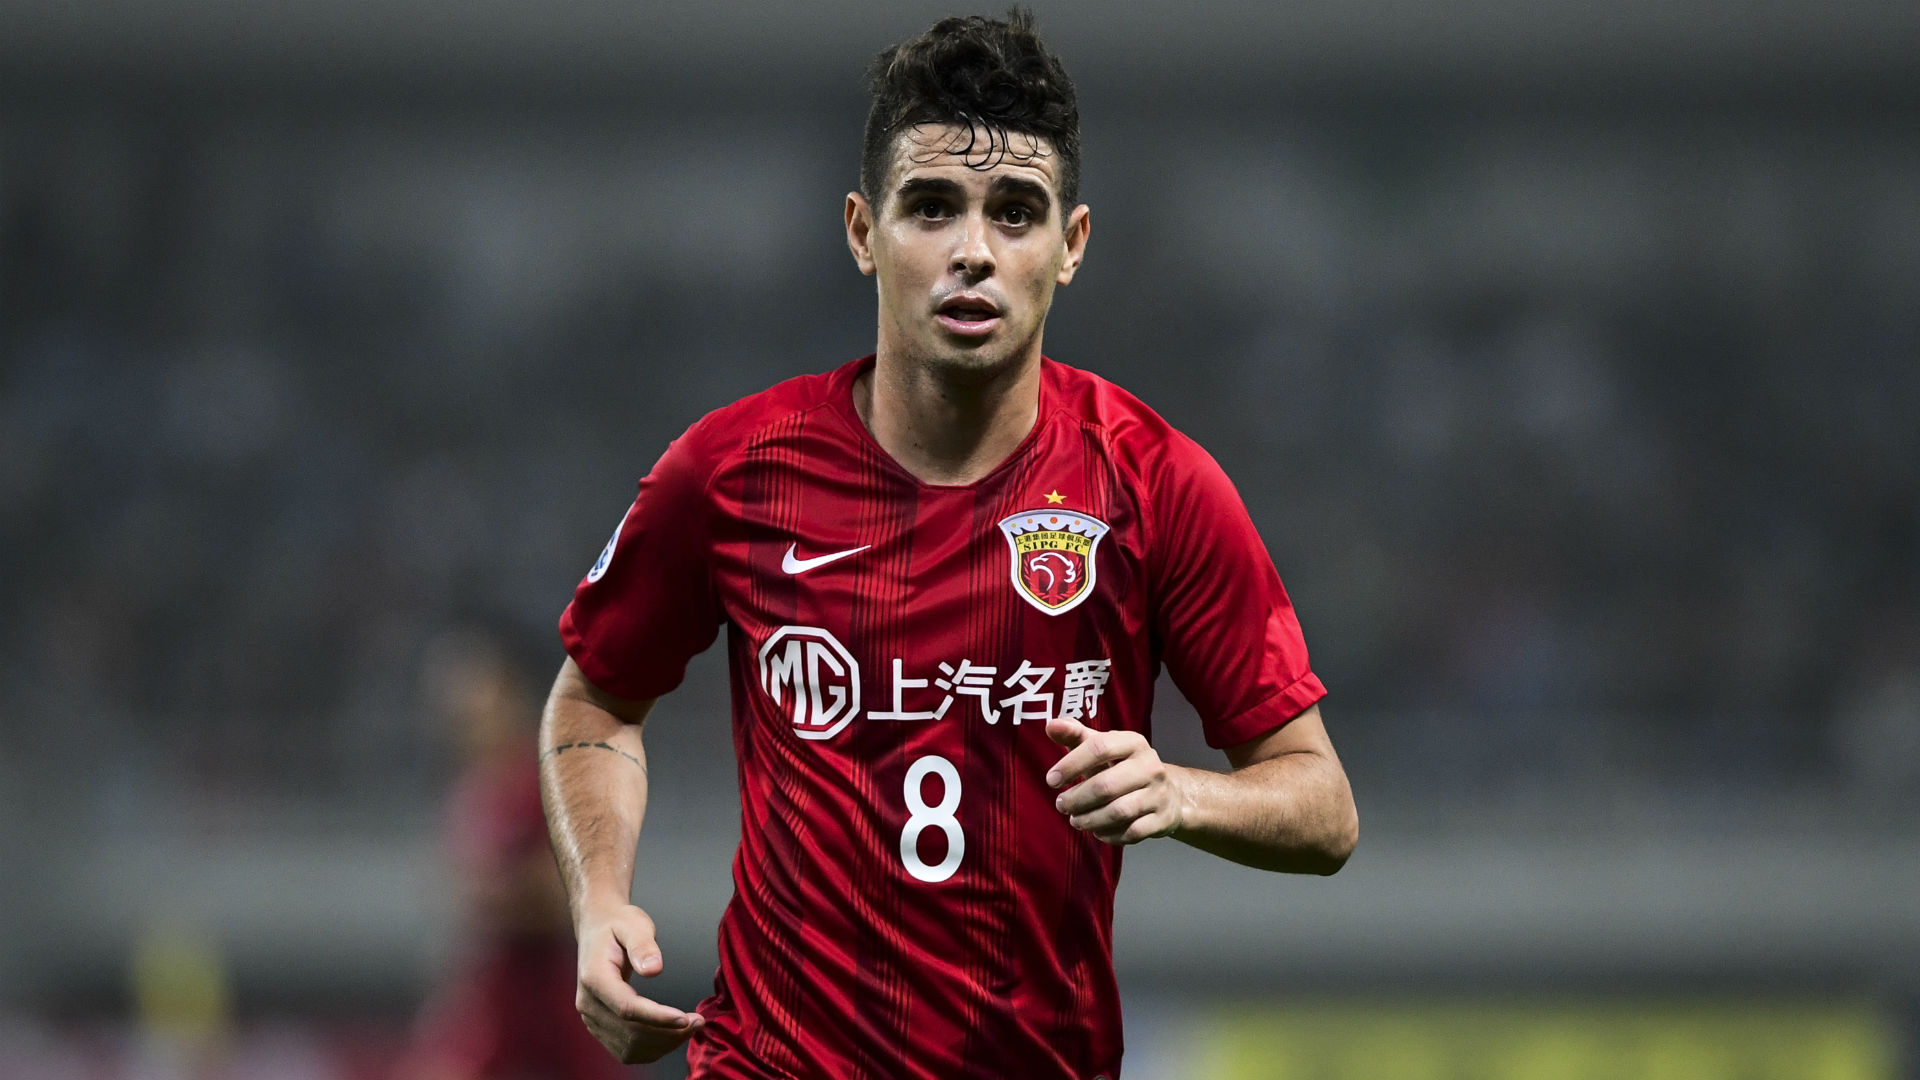 Shanghai SIPG are into the knockout stages of the AFC Champions League, as are Urawa Reds after a crucial win over Beijing Guoan.